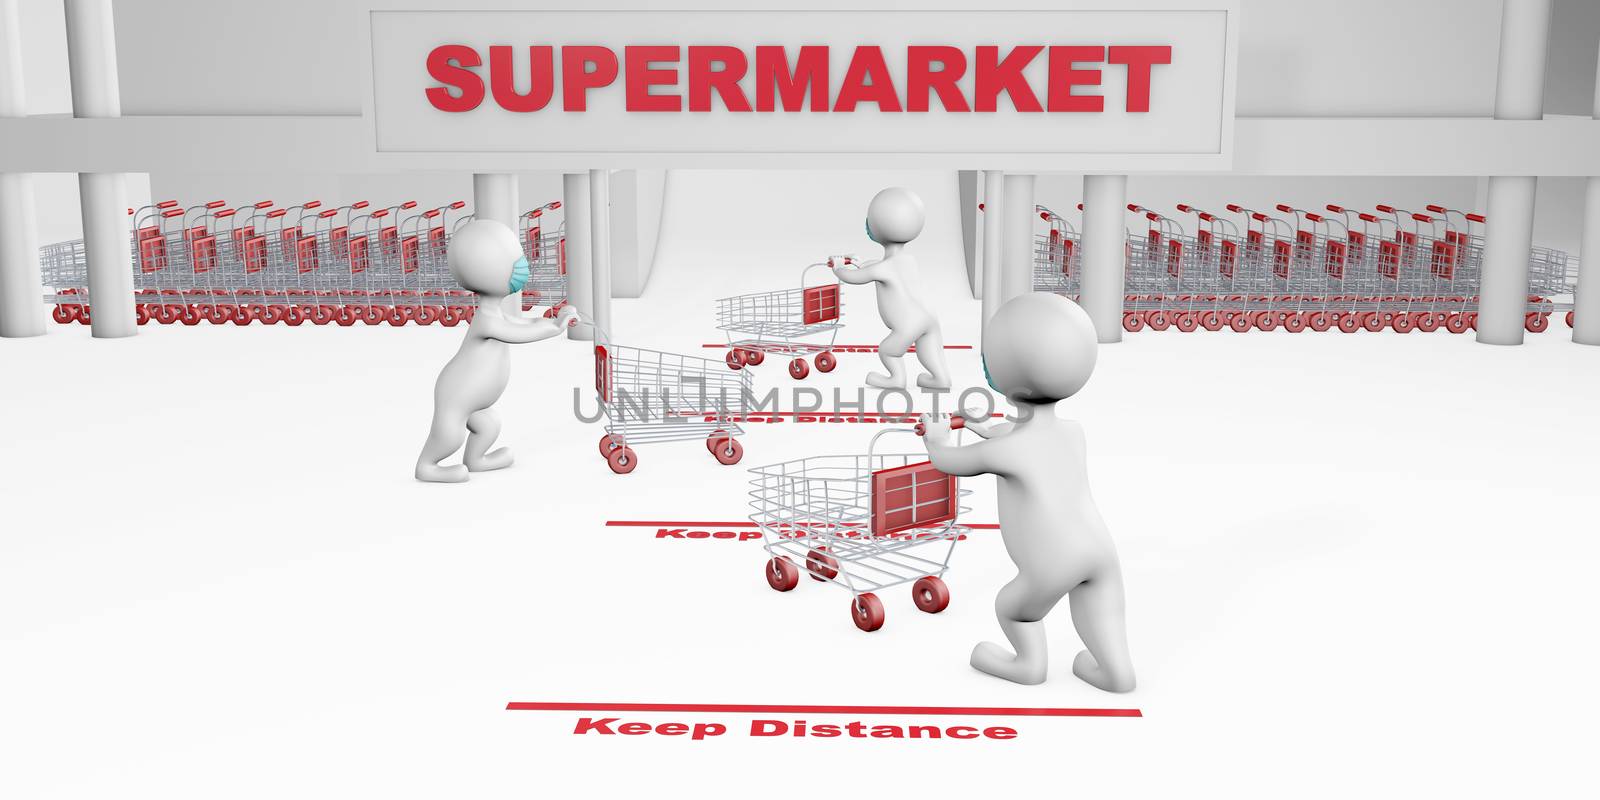 Supermarket 3d rendering concept during pandemic. Men shopping with masks keeping distance